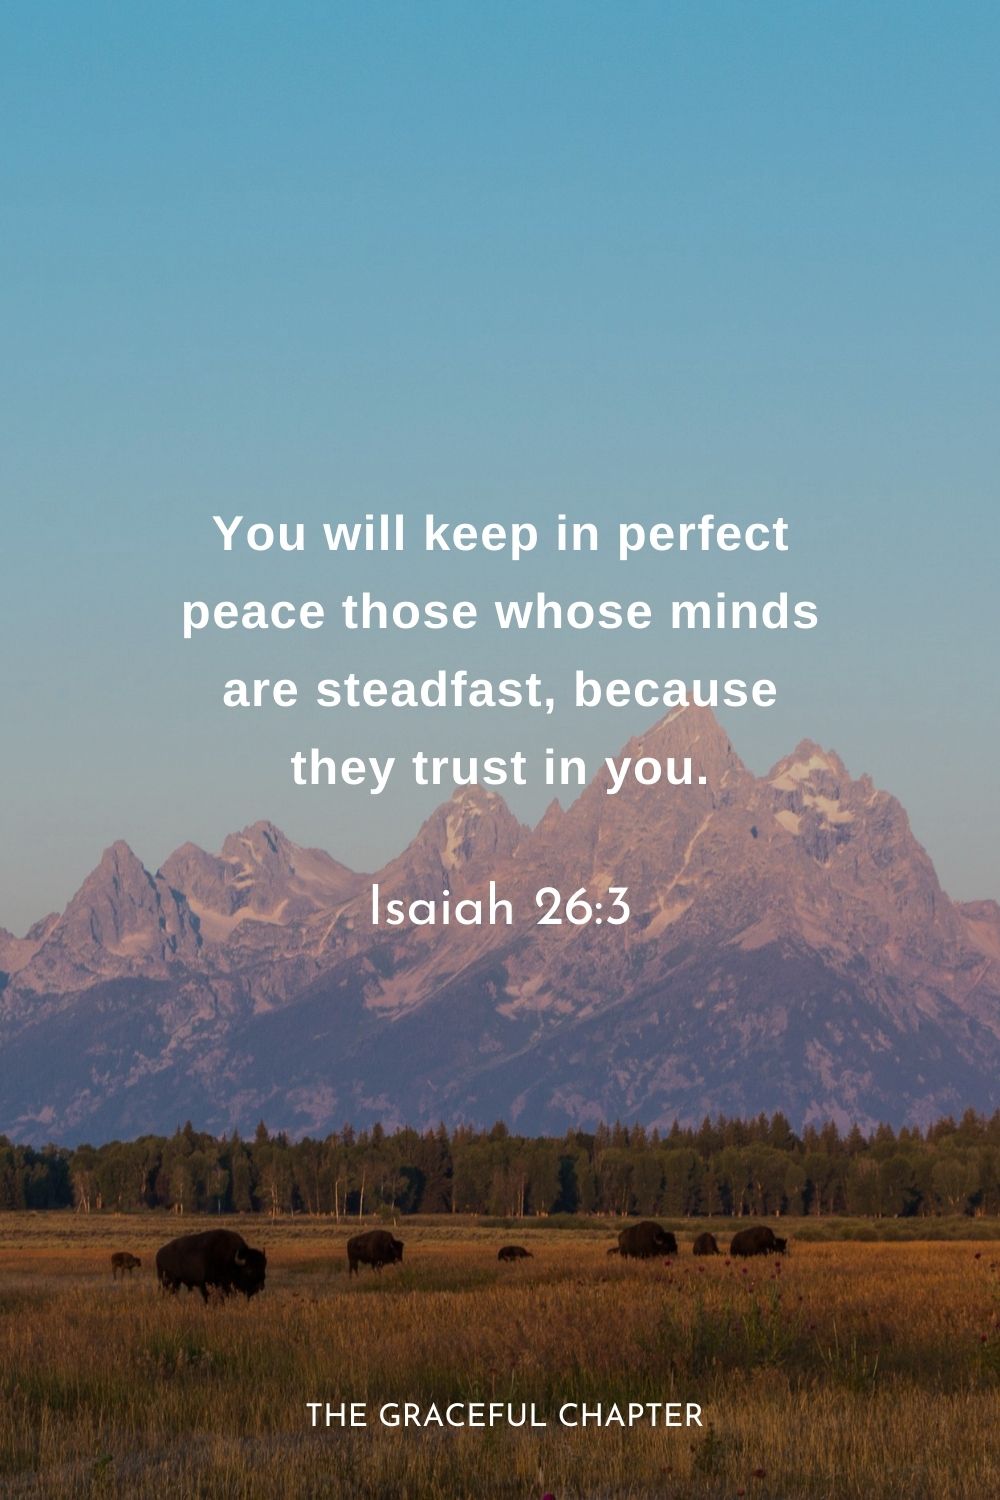 You will keep in perfect peace those whose minds are steadfast, because they trust in you.